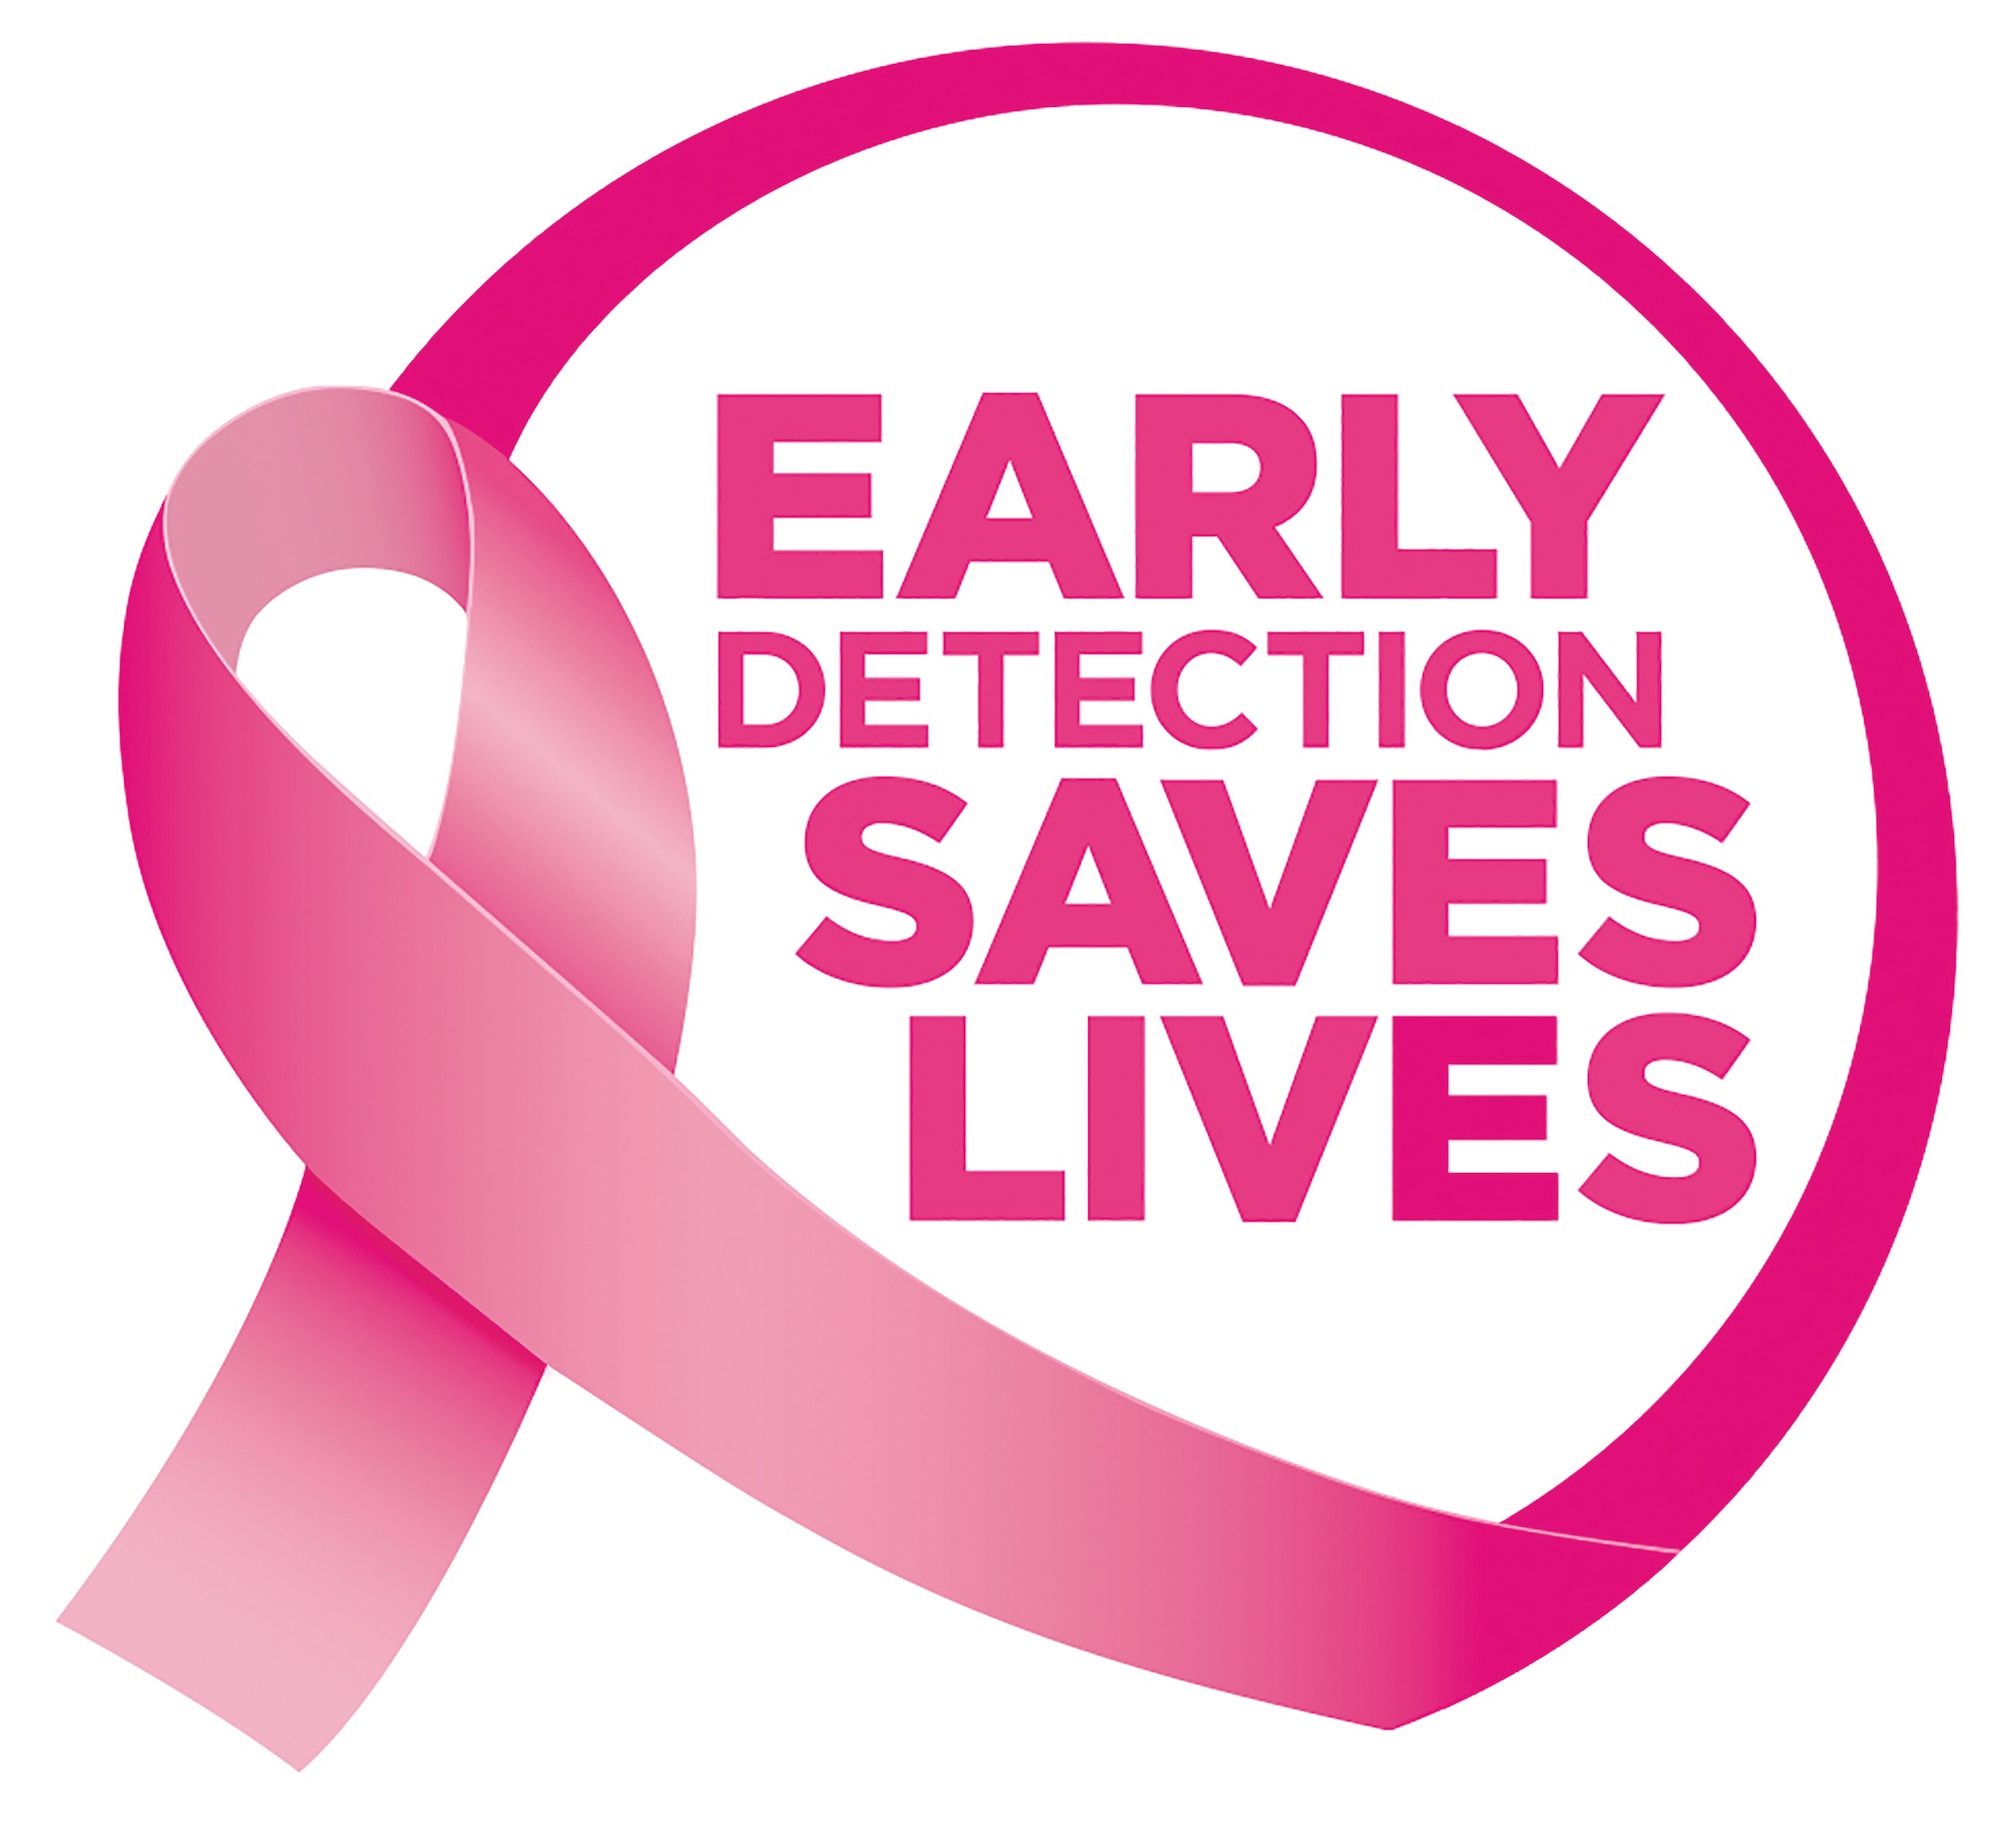 October is Breast Cancer Awareness Month. The goal of the month is to promote awareness of the symptoms and warning signs of breast cancer, as well as to raise funding for research. An additional point to the campaign is promoting mammograms for early detection.